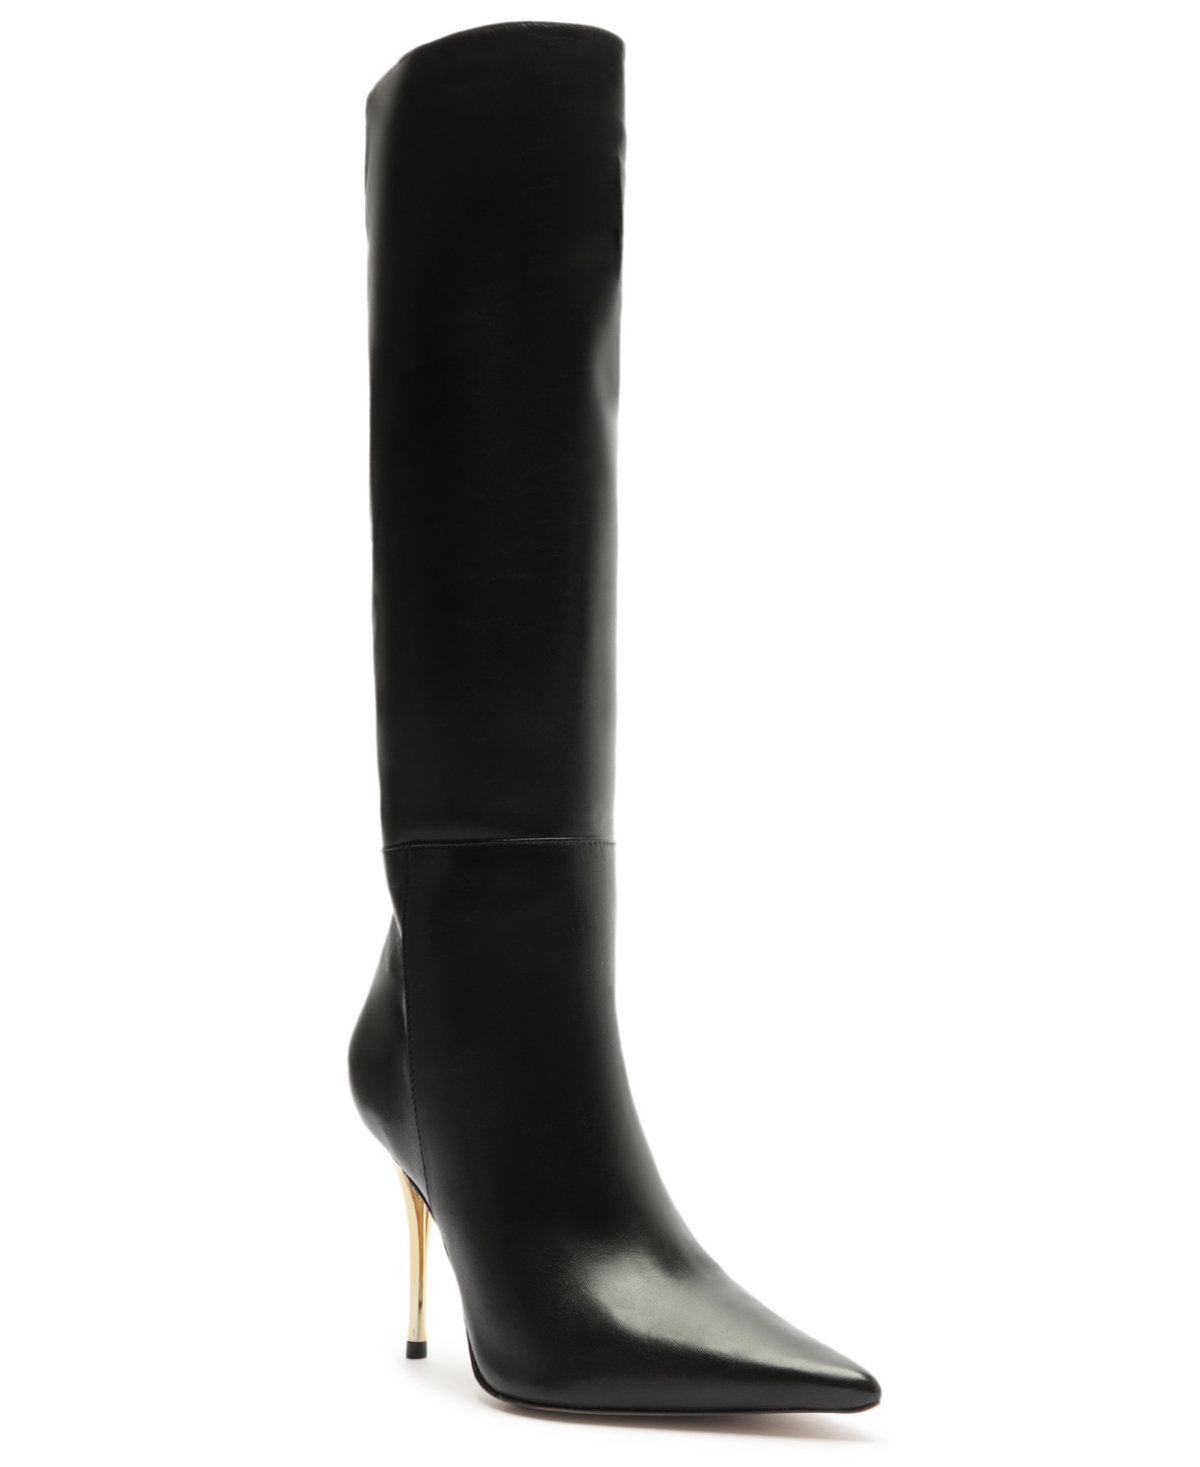 Women's The Campaign Over-the-Knee Boots - Black